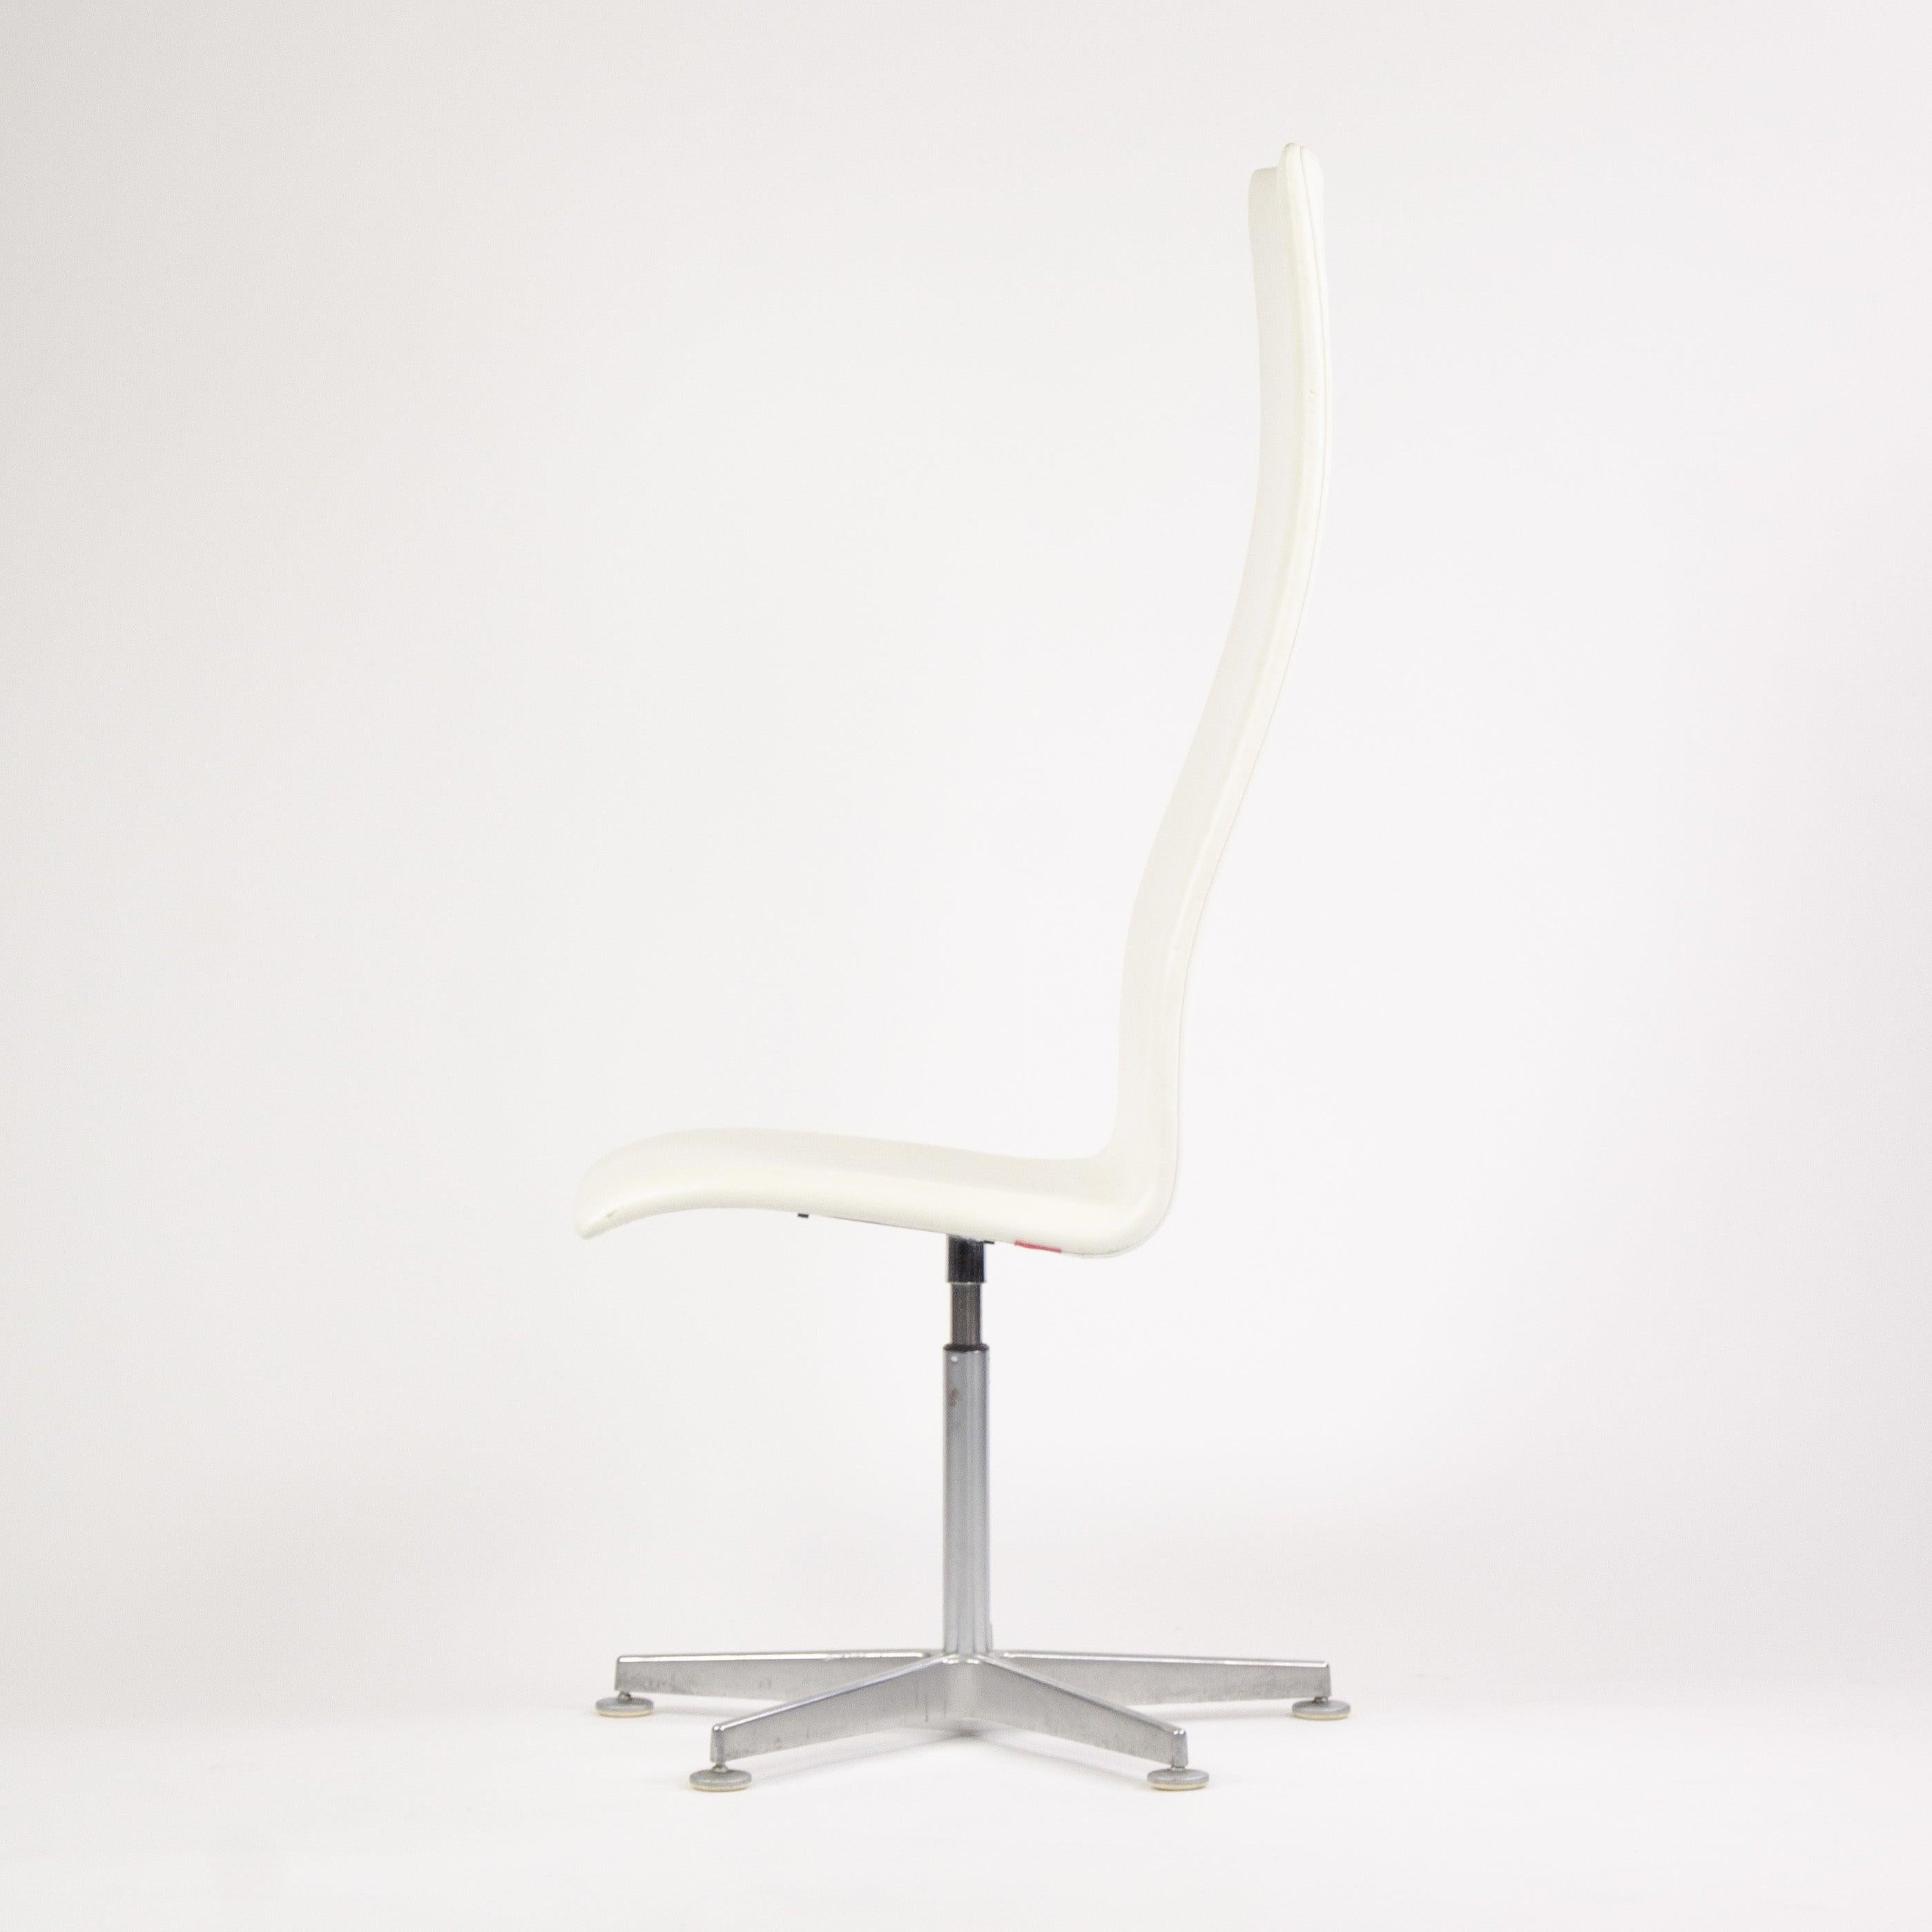 Danish Fritz Hansen Arne Jacobsen Tall Oxford Chair White Leather 2007 4x Available For Sale